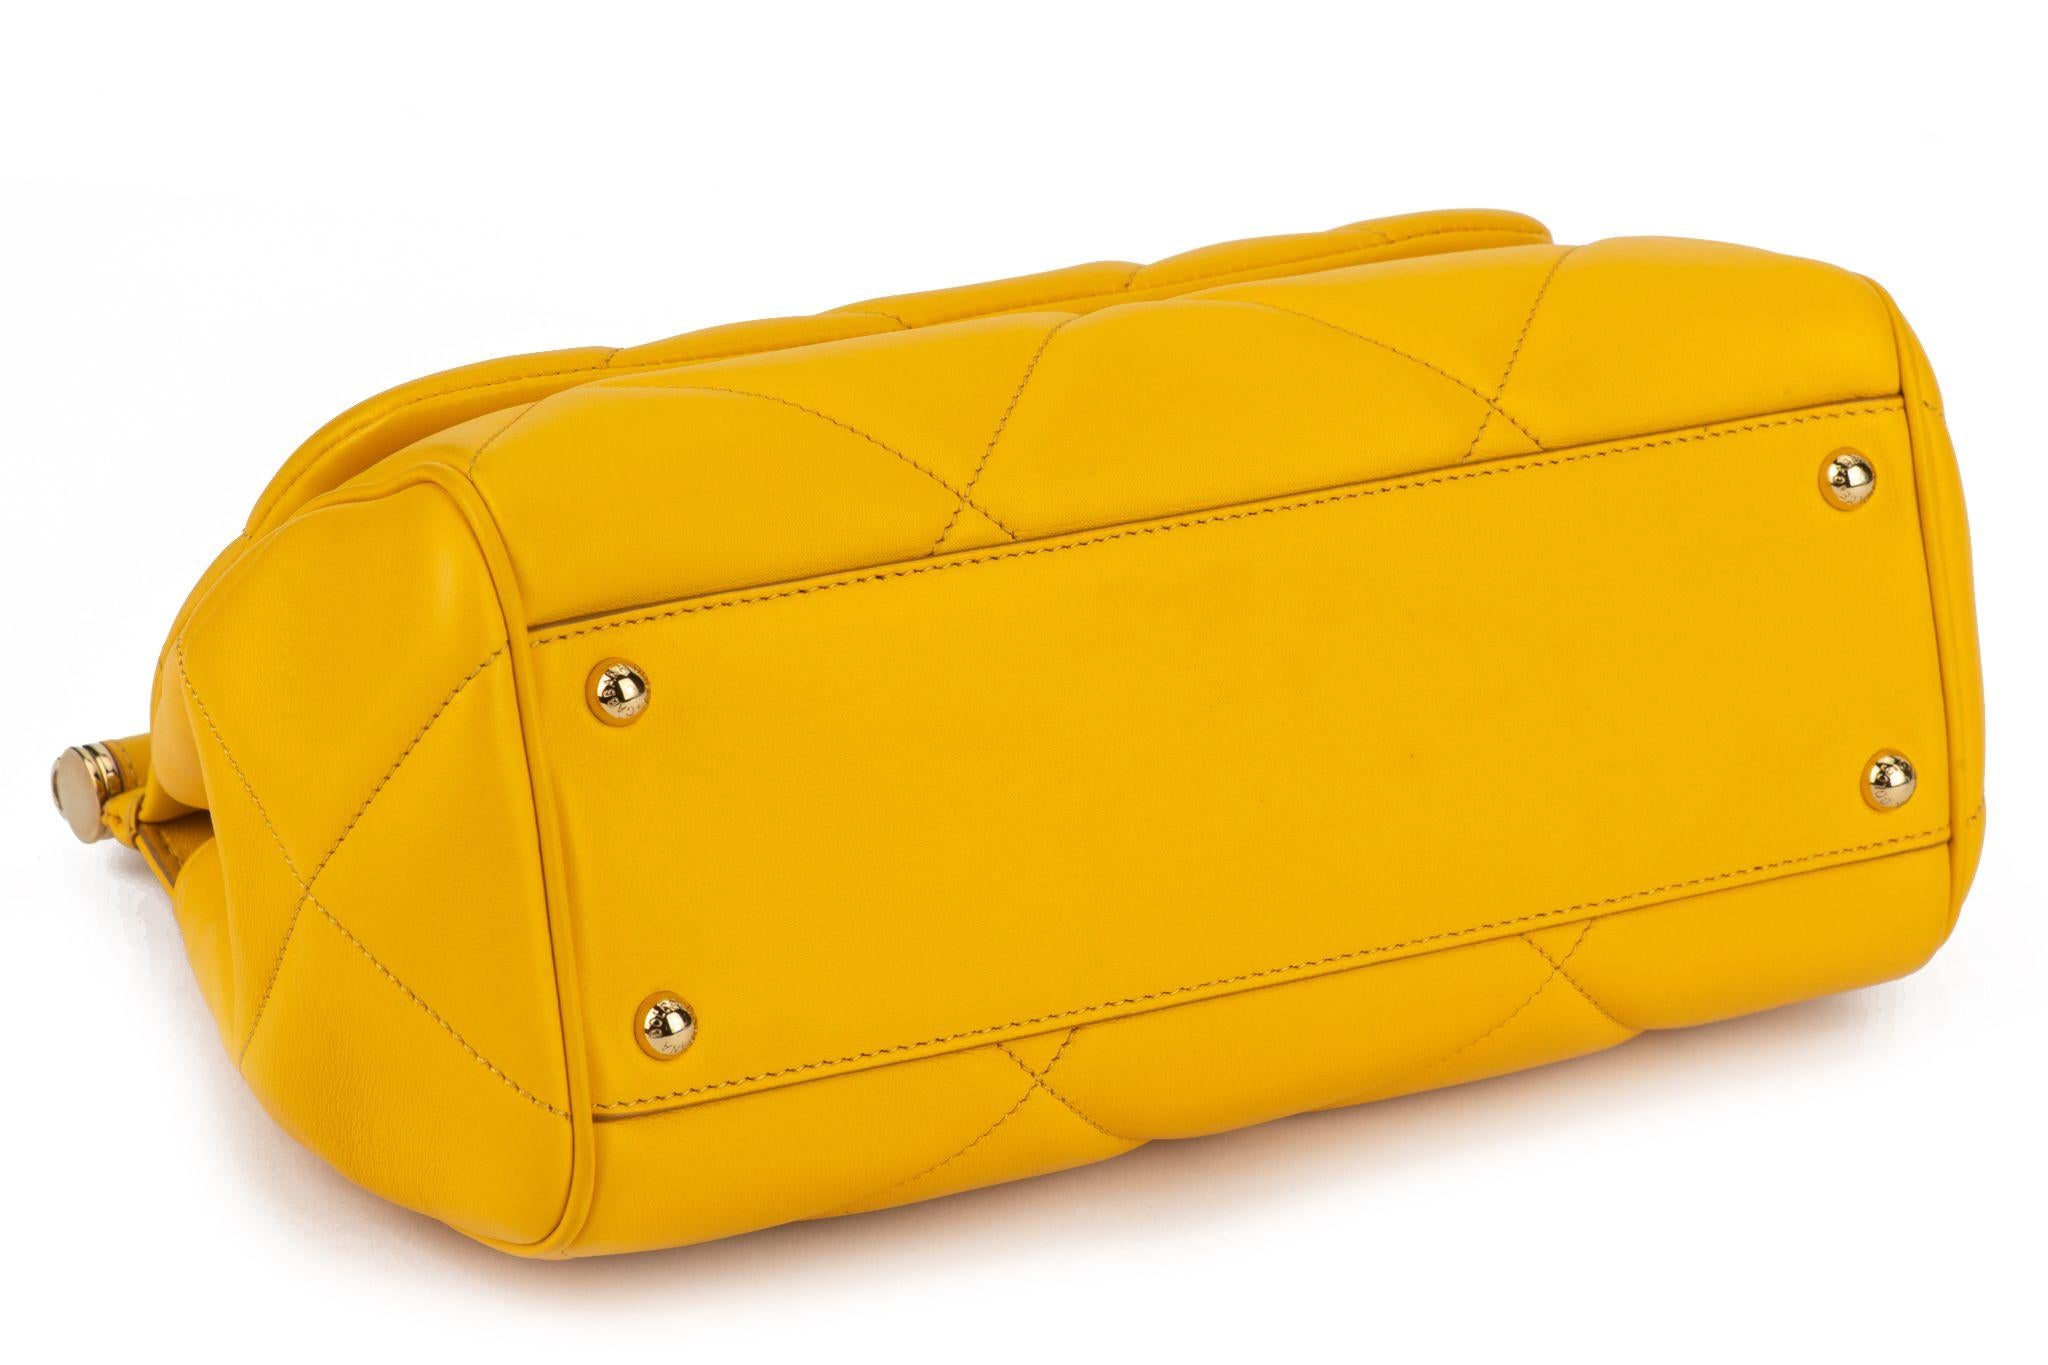 Dolce & Gabbana New Yellow Sicily Bag For Sale 1